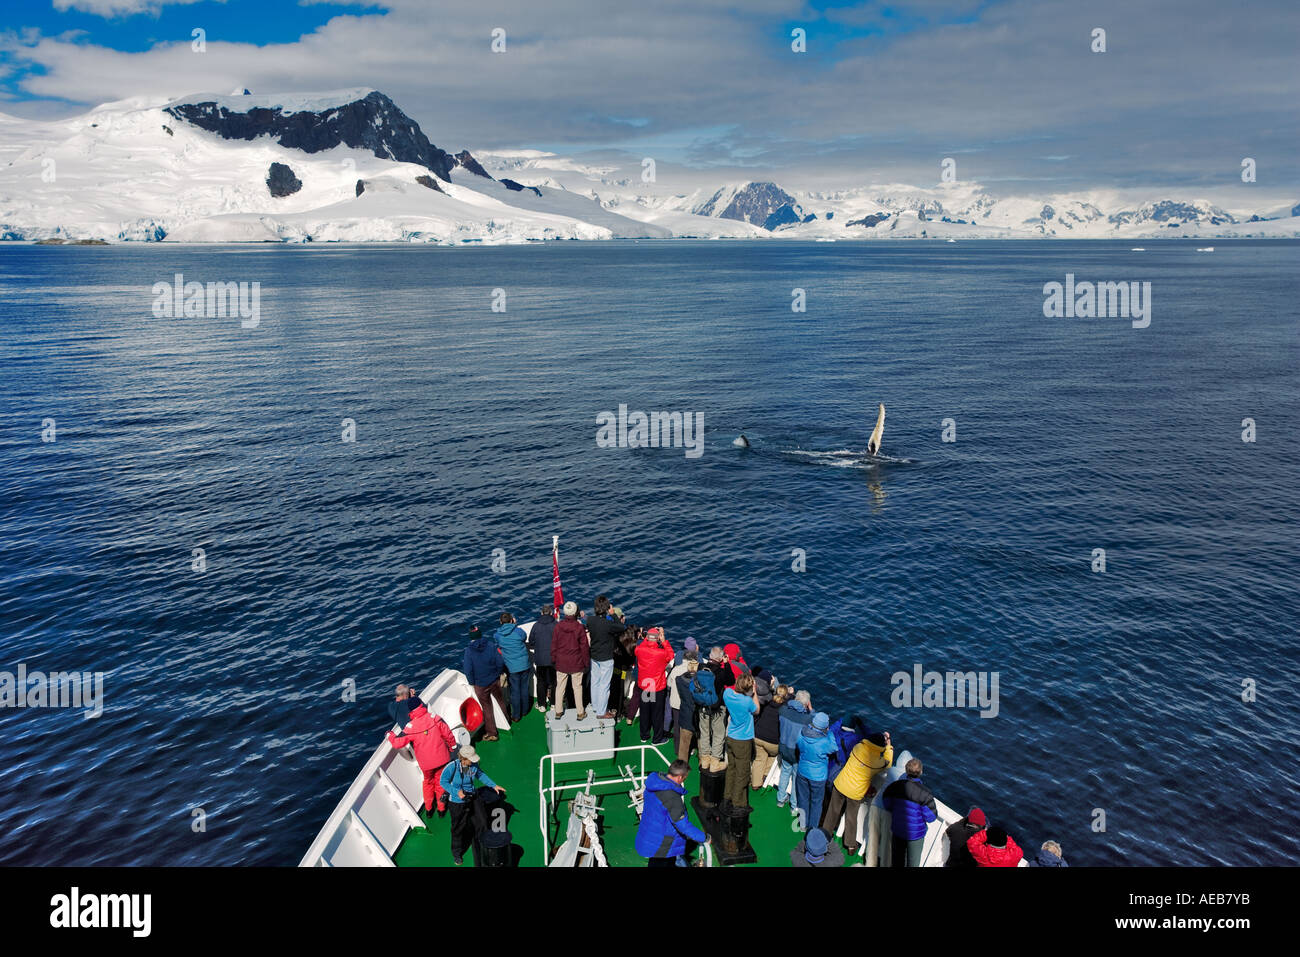 Tourists watching and photographing a whale. Antarctica Stock Photo